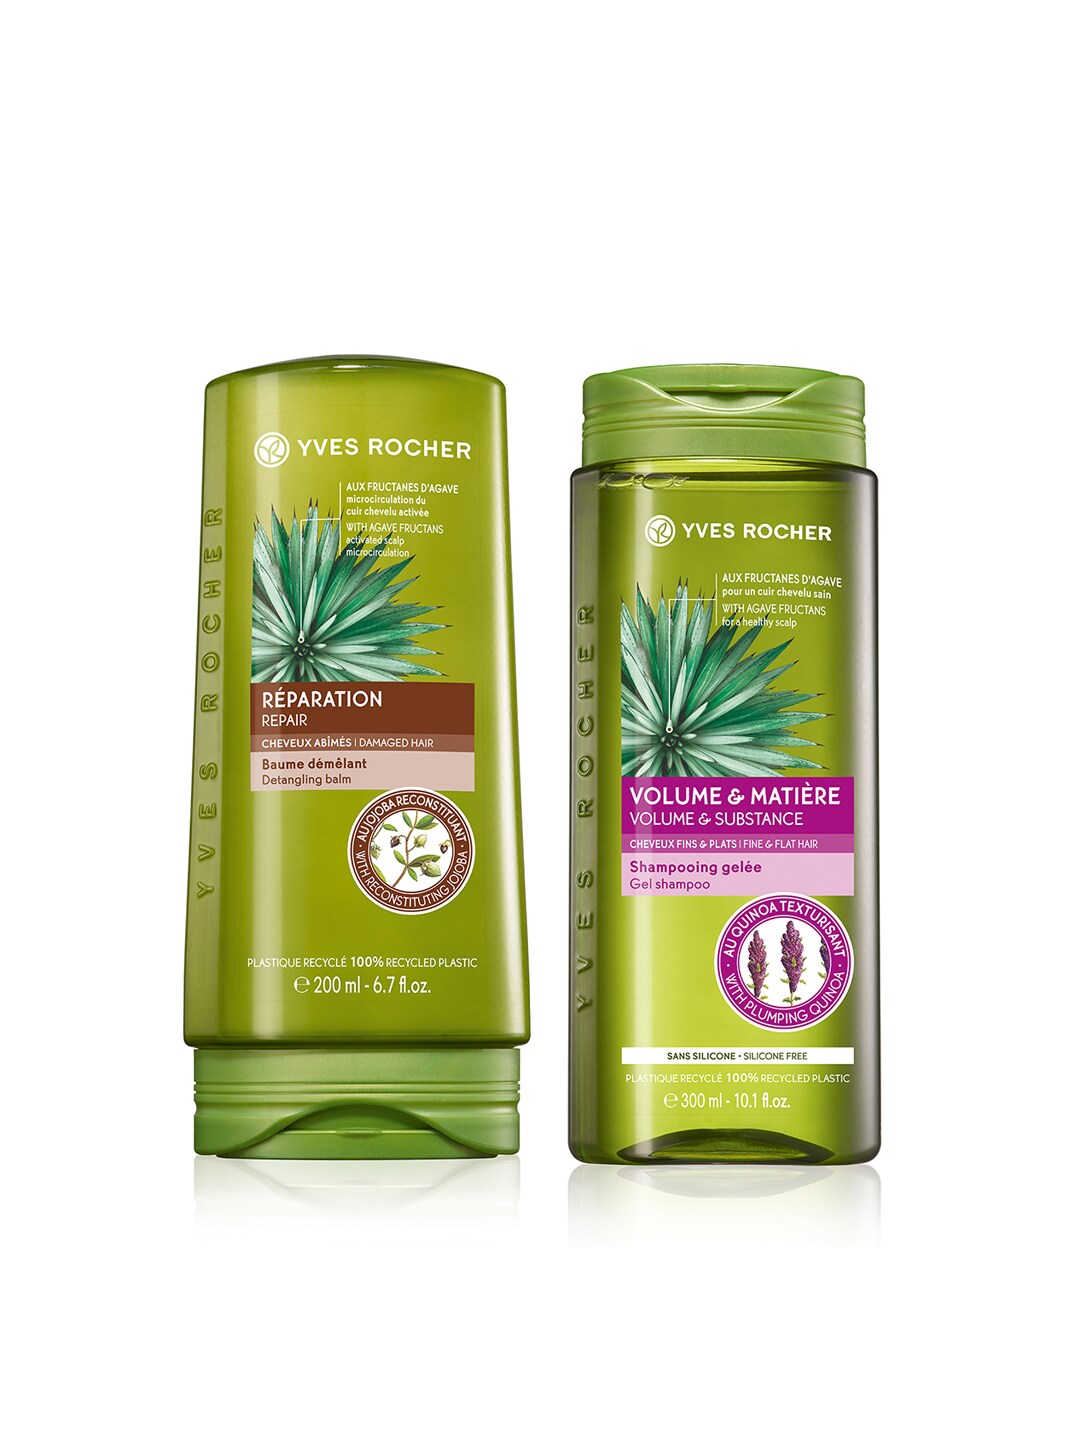 YVES ROCHER Set of Sustainable Gel Shampoo & Balm Conditioner Price in India